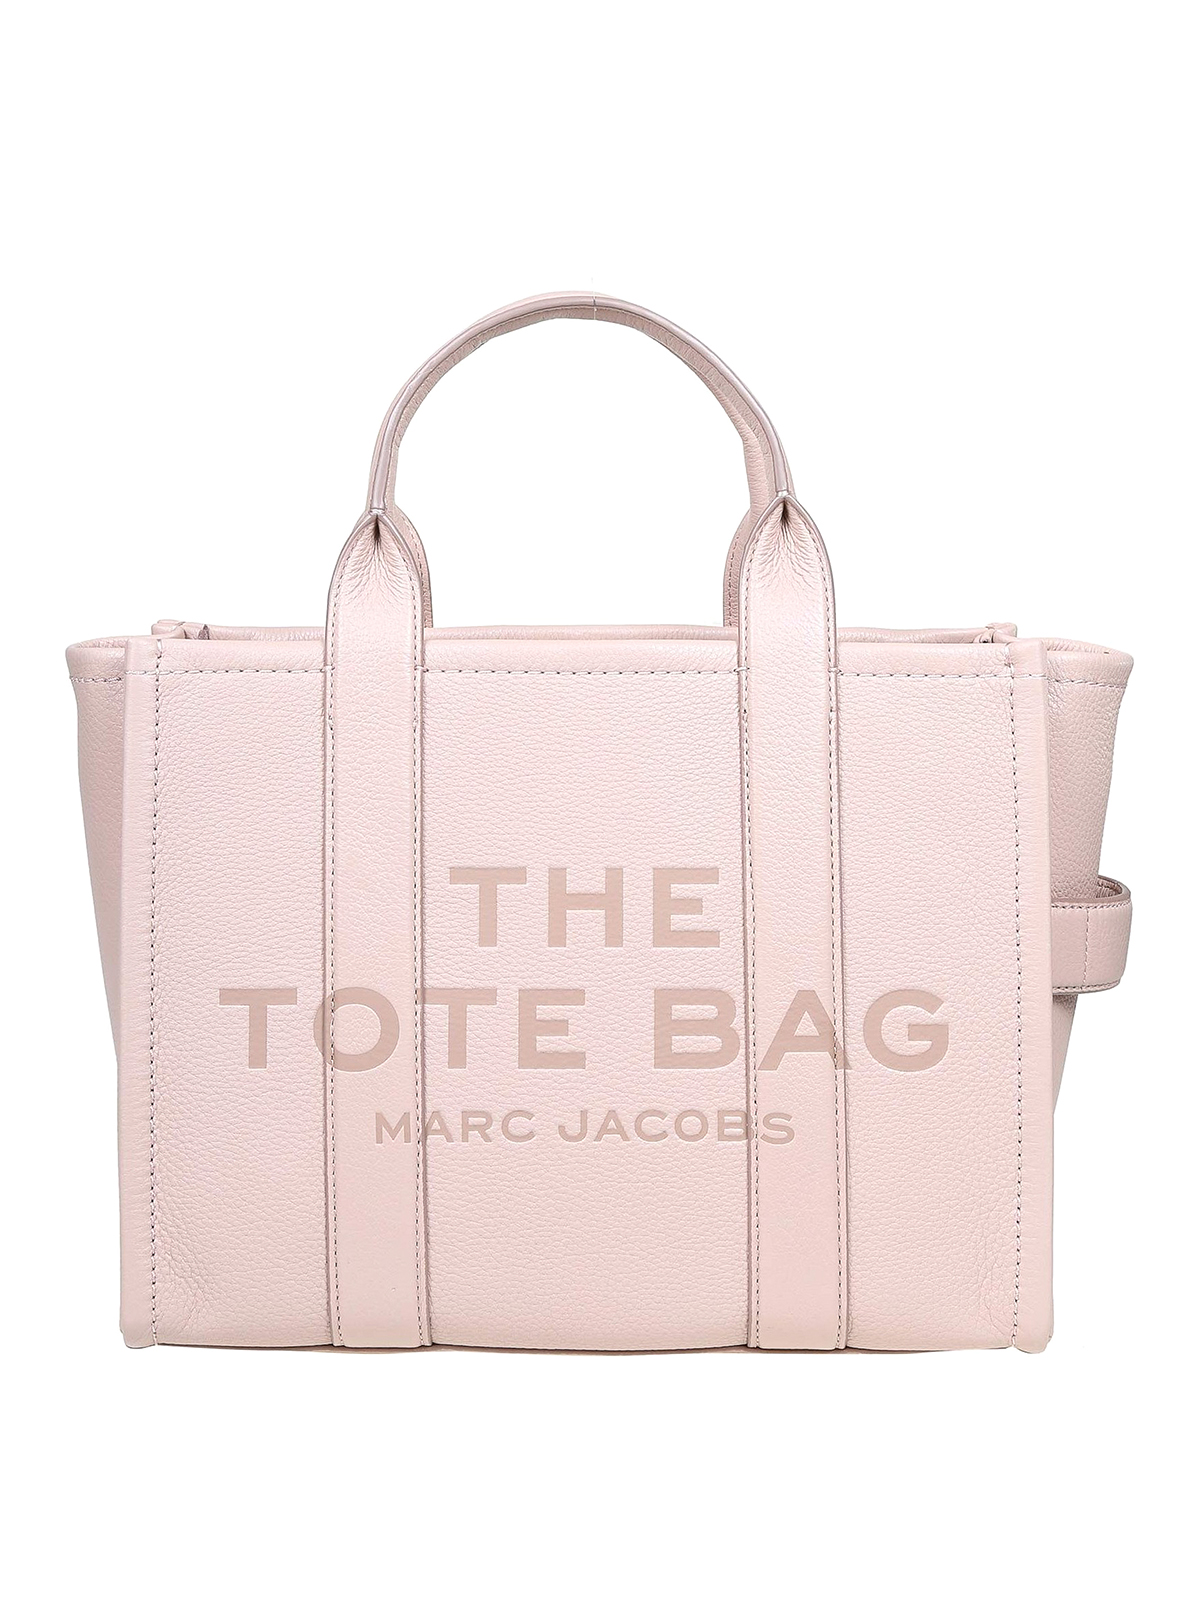 MARC JACOBS, Small Tote Bag, Women, Tote Bags